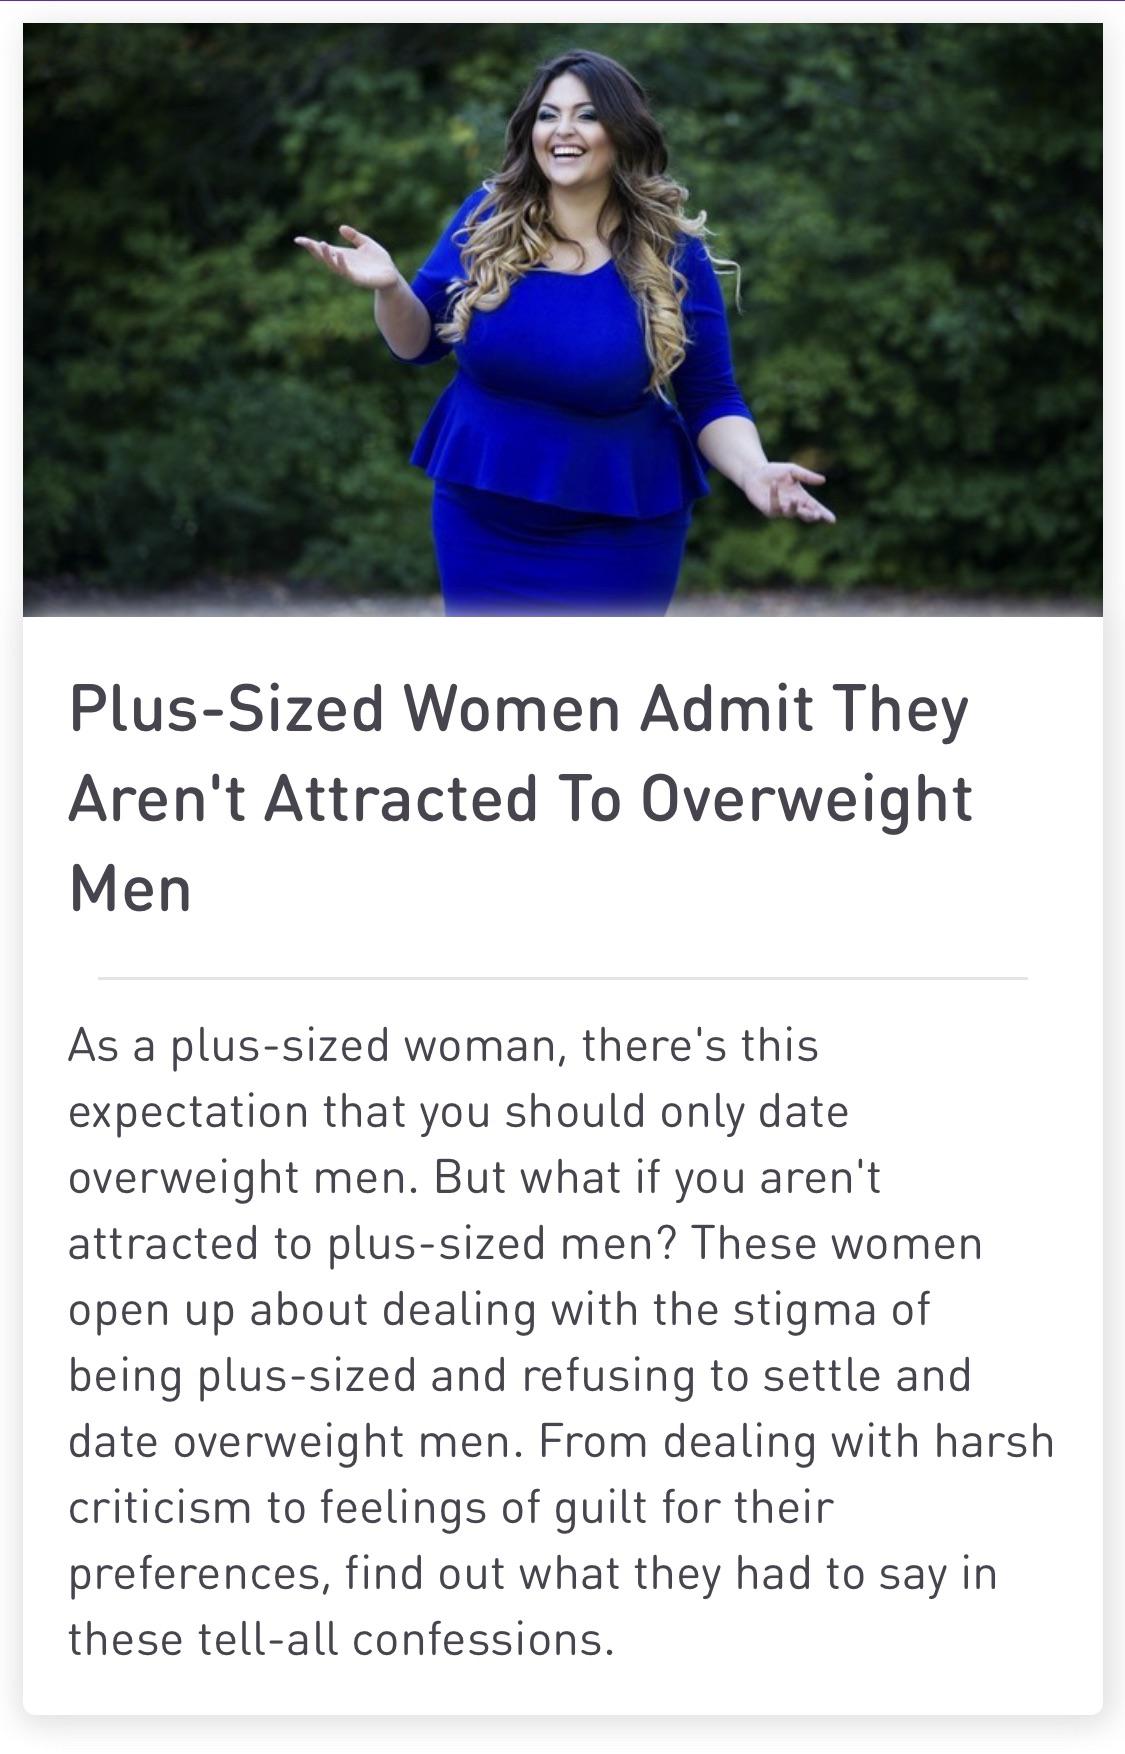 happiness - PlusSized Women Admit They Aren't Attracted To Overweight Men As a plussized woman, there's this expectation that you should only date overweight men. But what if you aren't attracted to plussized men? These women open up about dealing with th